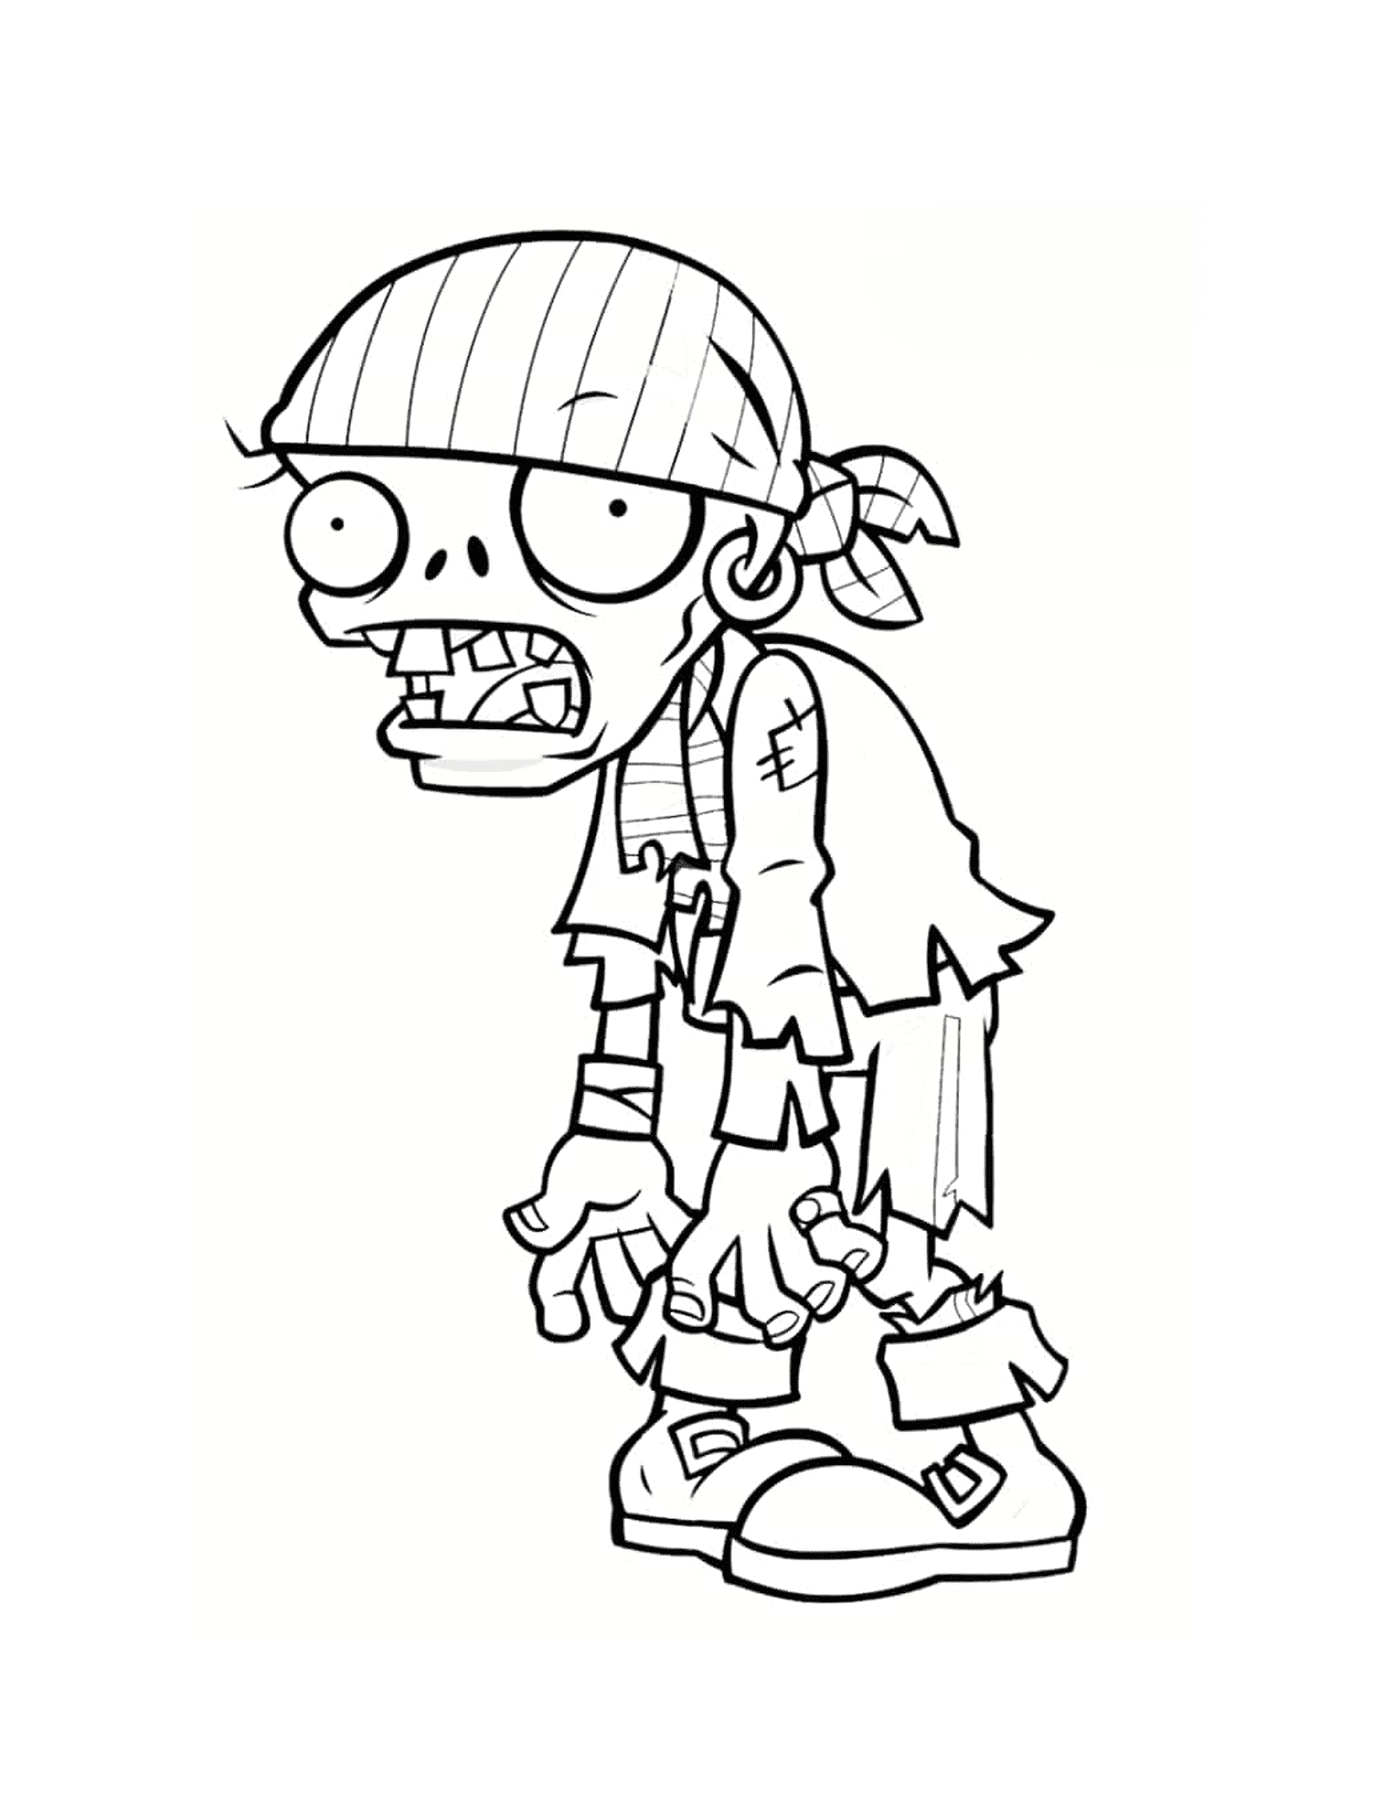  A zombie wearing a pirate hat 